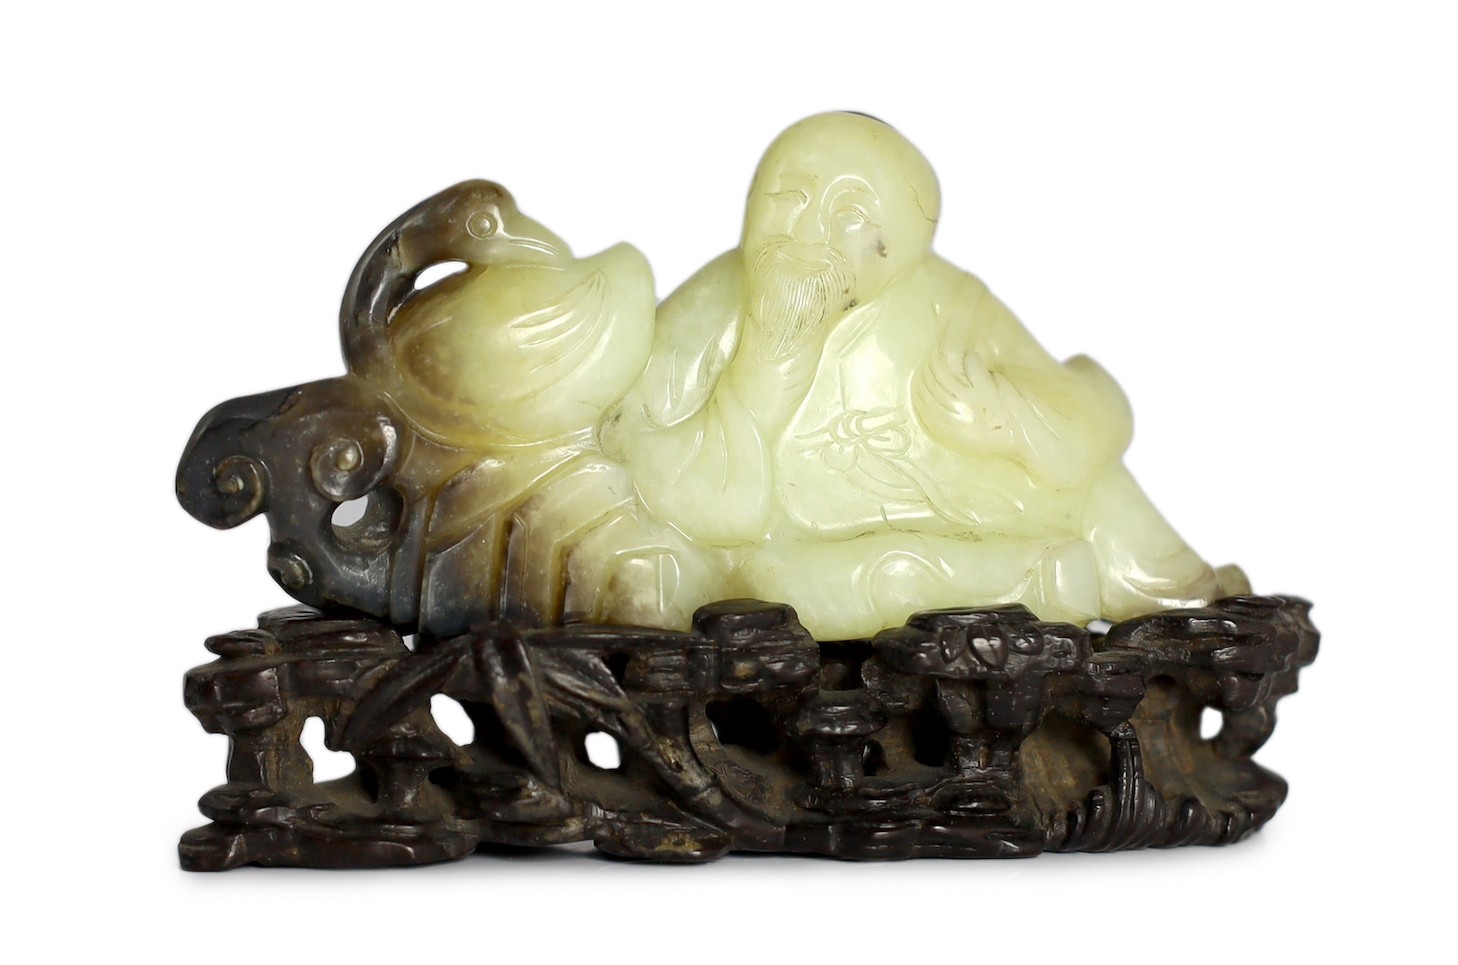 A Chinese white and black jade group of the calligrapher Wang Xizhi seated by a goose, 18th century, 9.7cm across, carved zitan wood stand                                                                                  